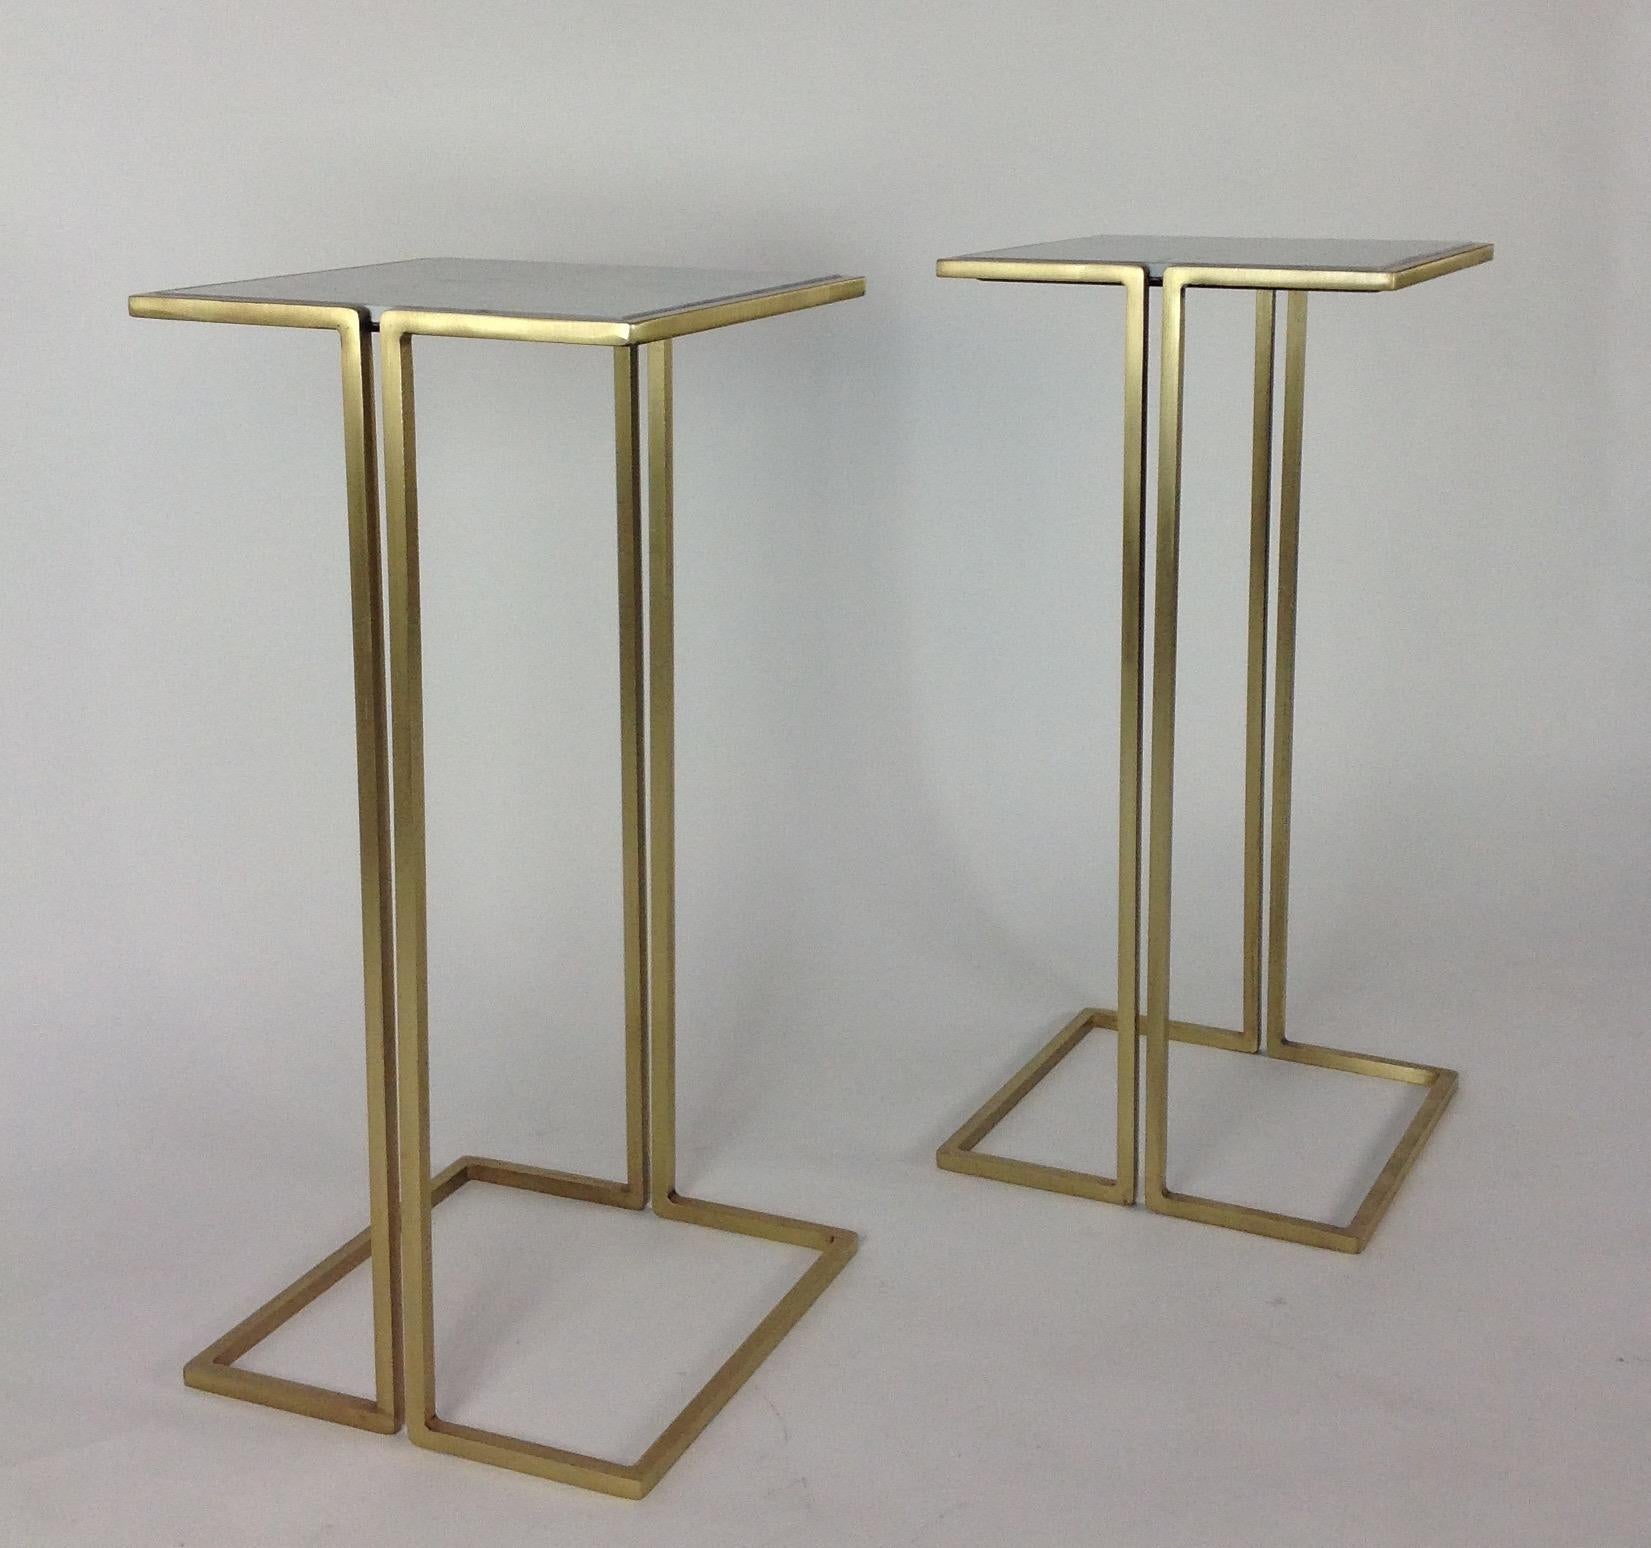 Contemporary Nantes Side Tables, Model D, Satin Brass by Bourgeois Boheme Atelier